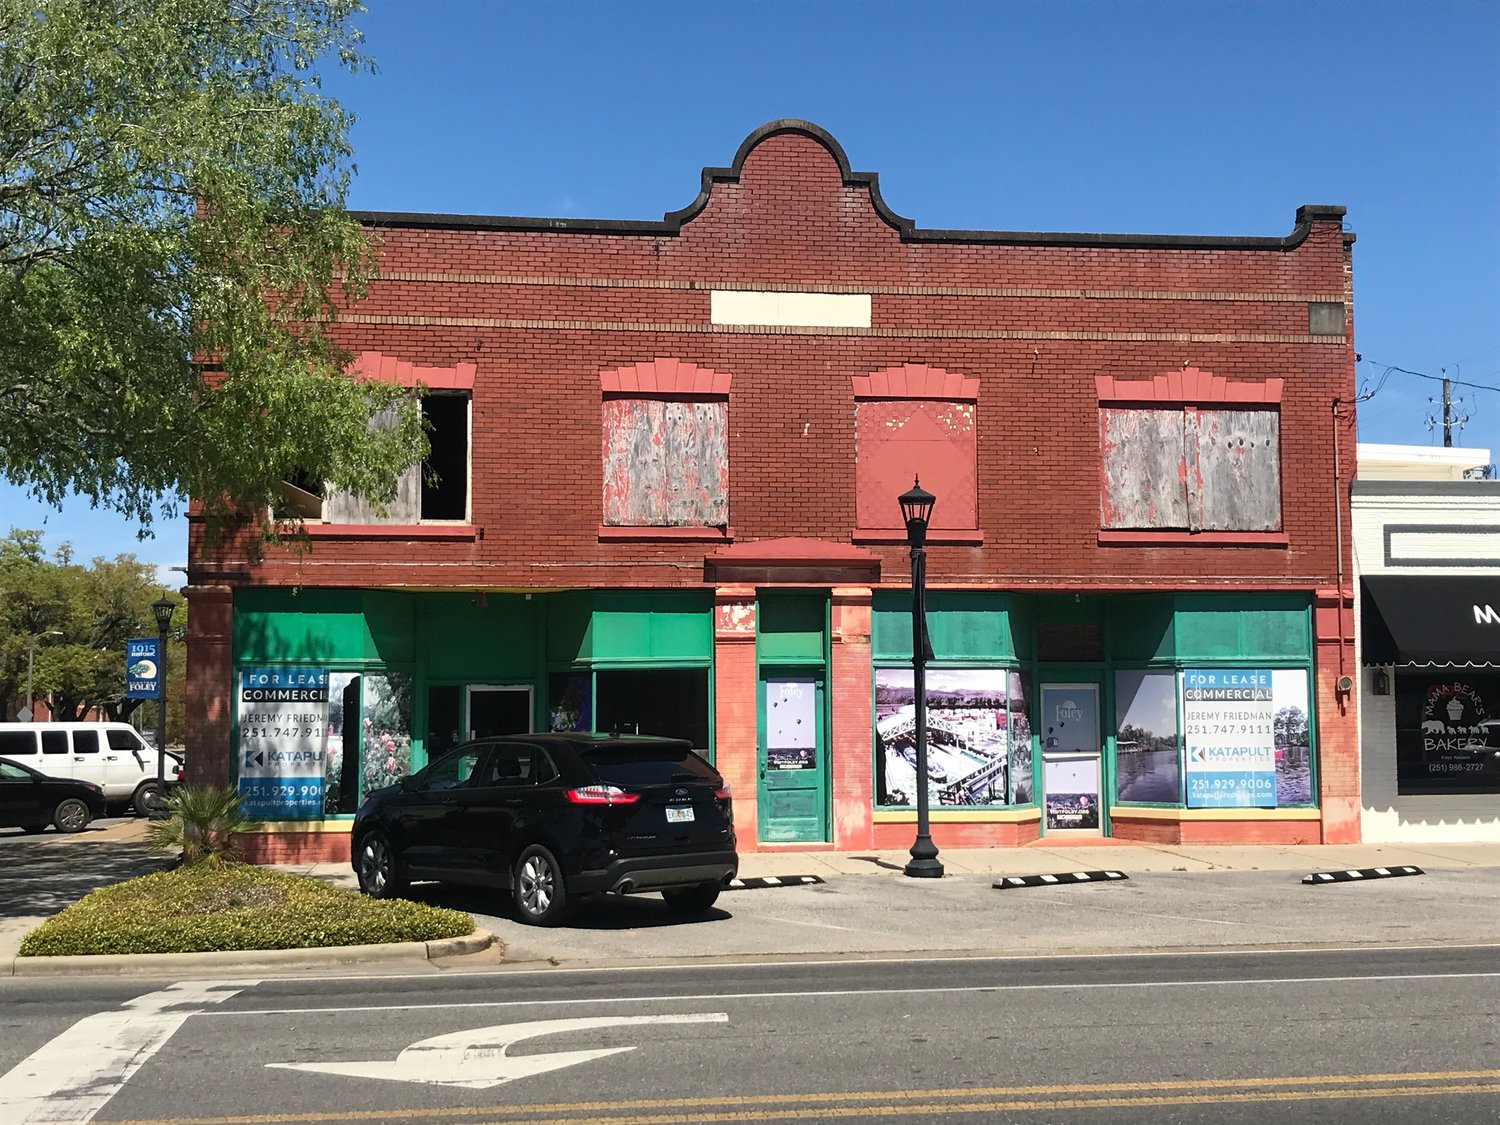 The Foley Bakery building at the corner of Alston Street and West Laurel Avenue is scheduled for renovations starting in April. The building, one of the oldest in Foley, was constructed in 1925. It has been closed since 2007.